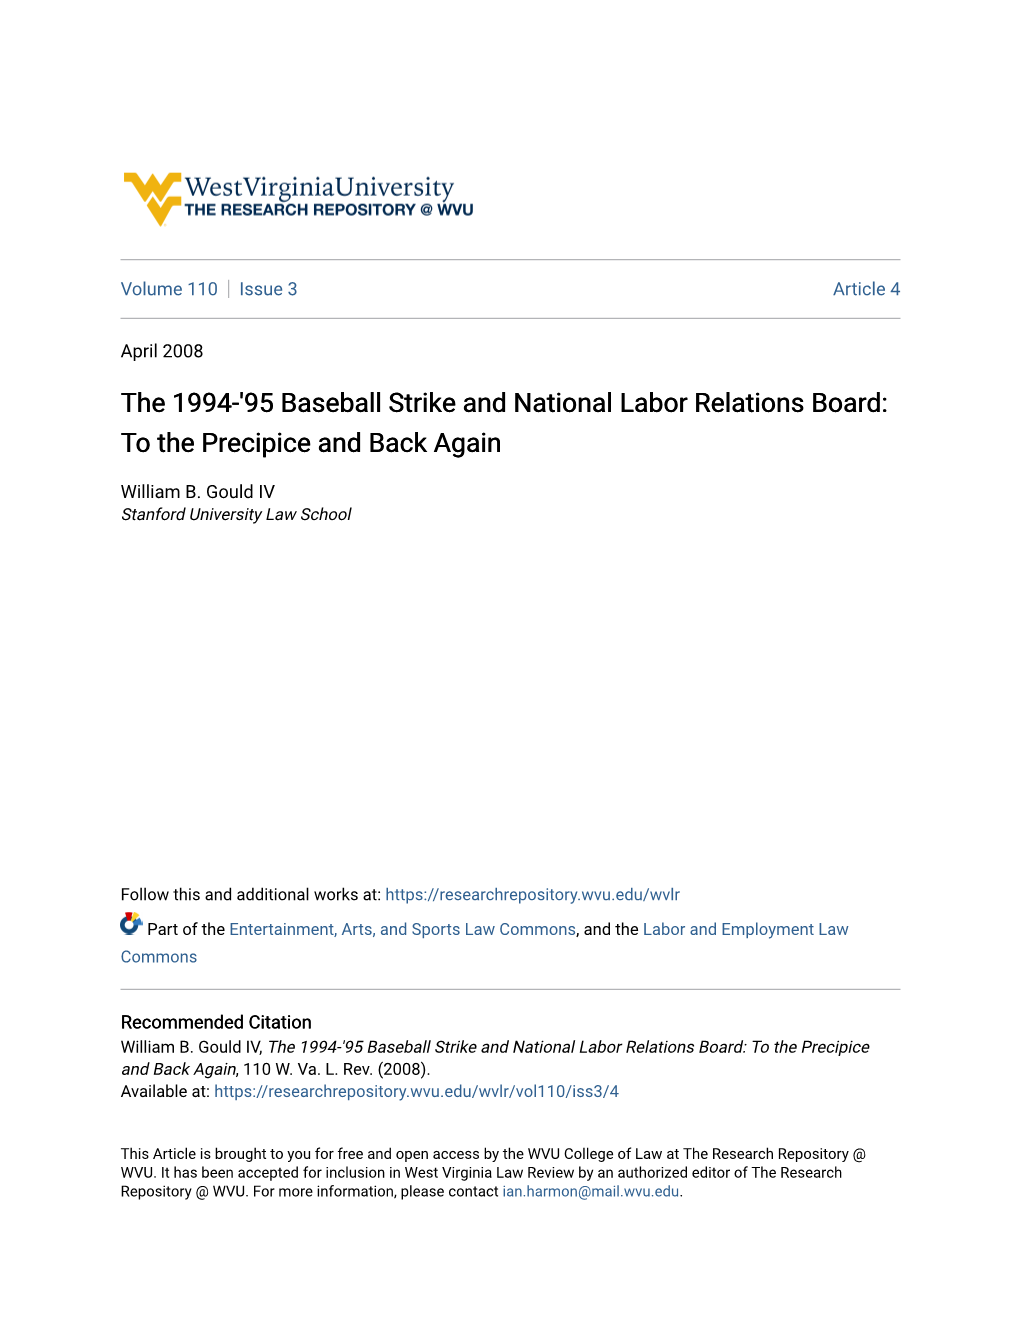 95 Baseball Strike and National Labor Relations Board: to the Precipice and Back Again